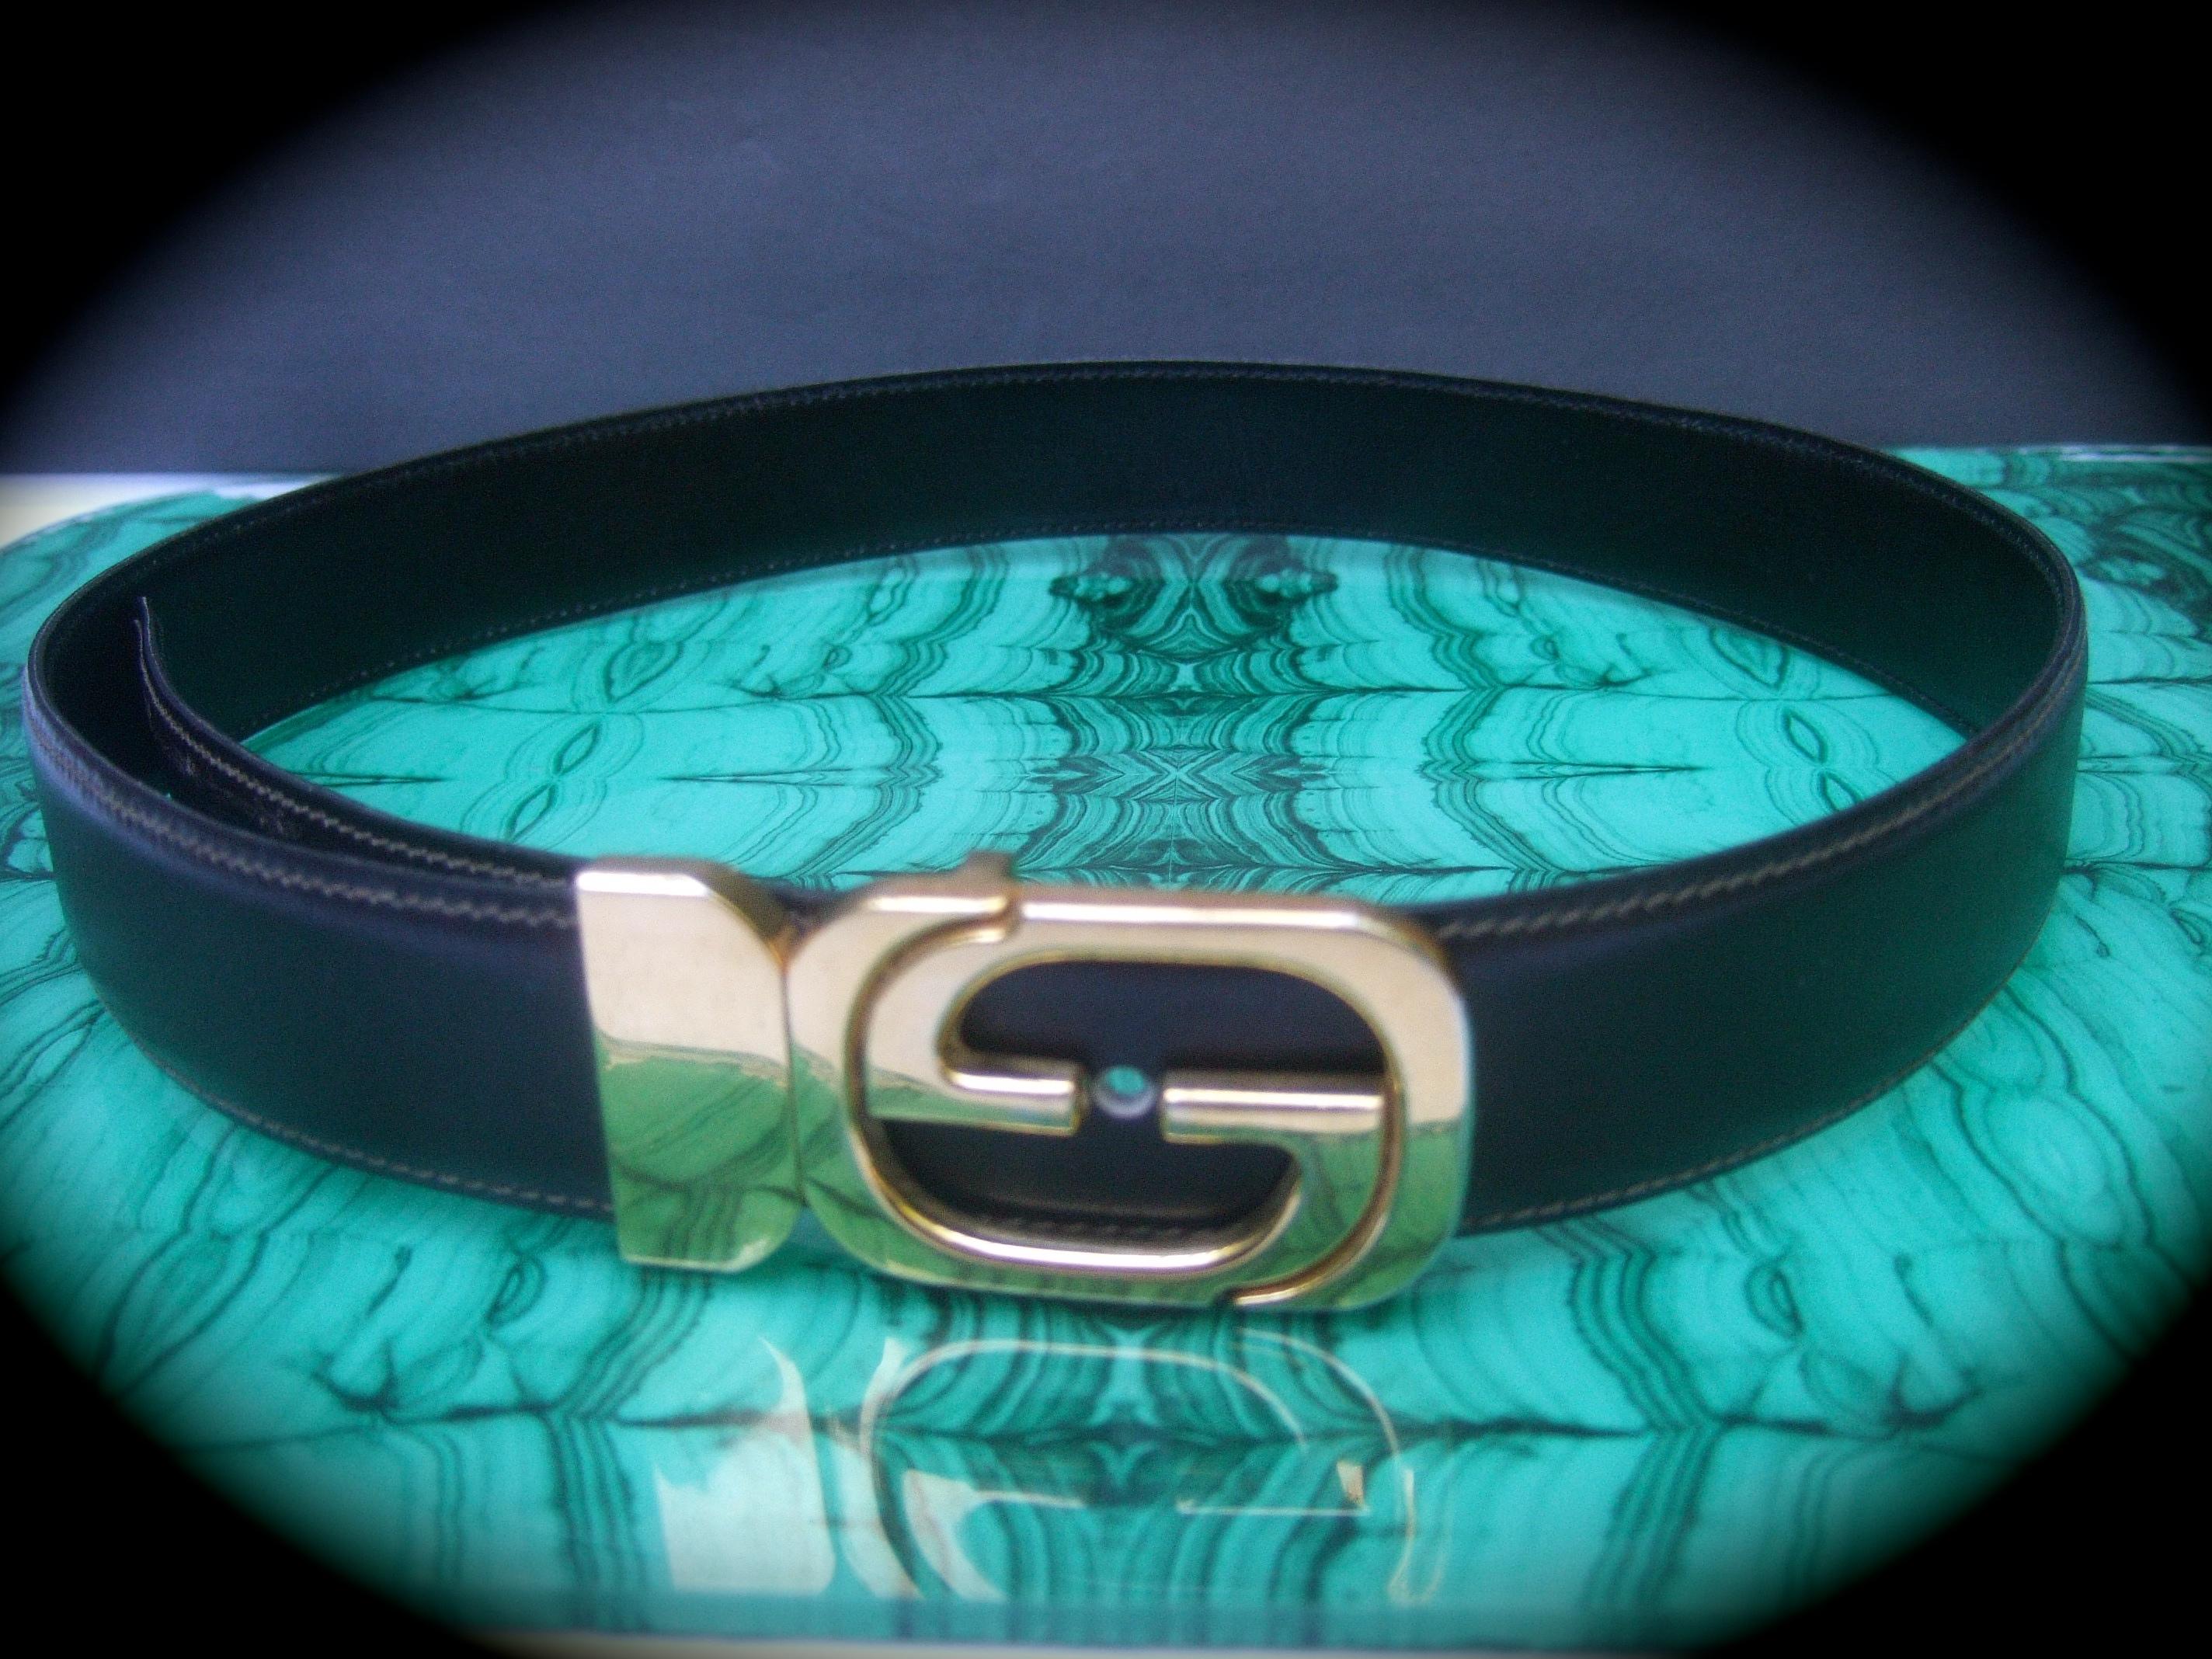 Gucci Italy black & brown reversible leather unisex belt c 1980
The stylish belt is adorned with a sleek gilt metal buckle with Gucci's iconic interlocked G.G. initials

Designed with a rotating buckle that allows for the belt to be worn on either